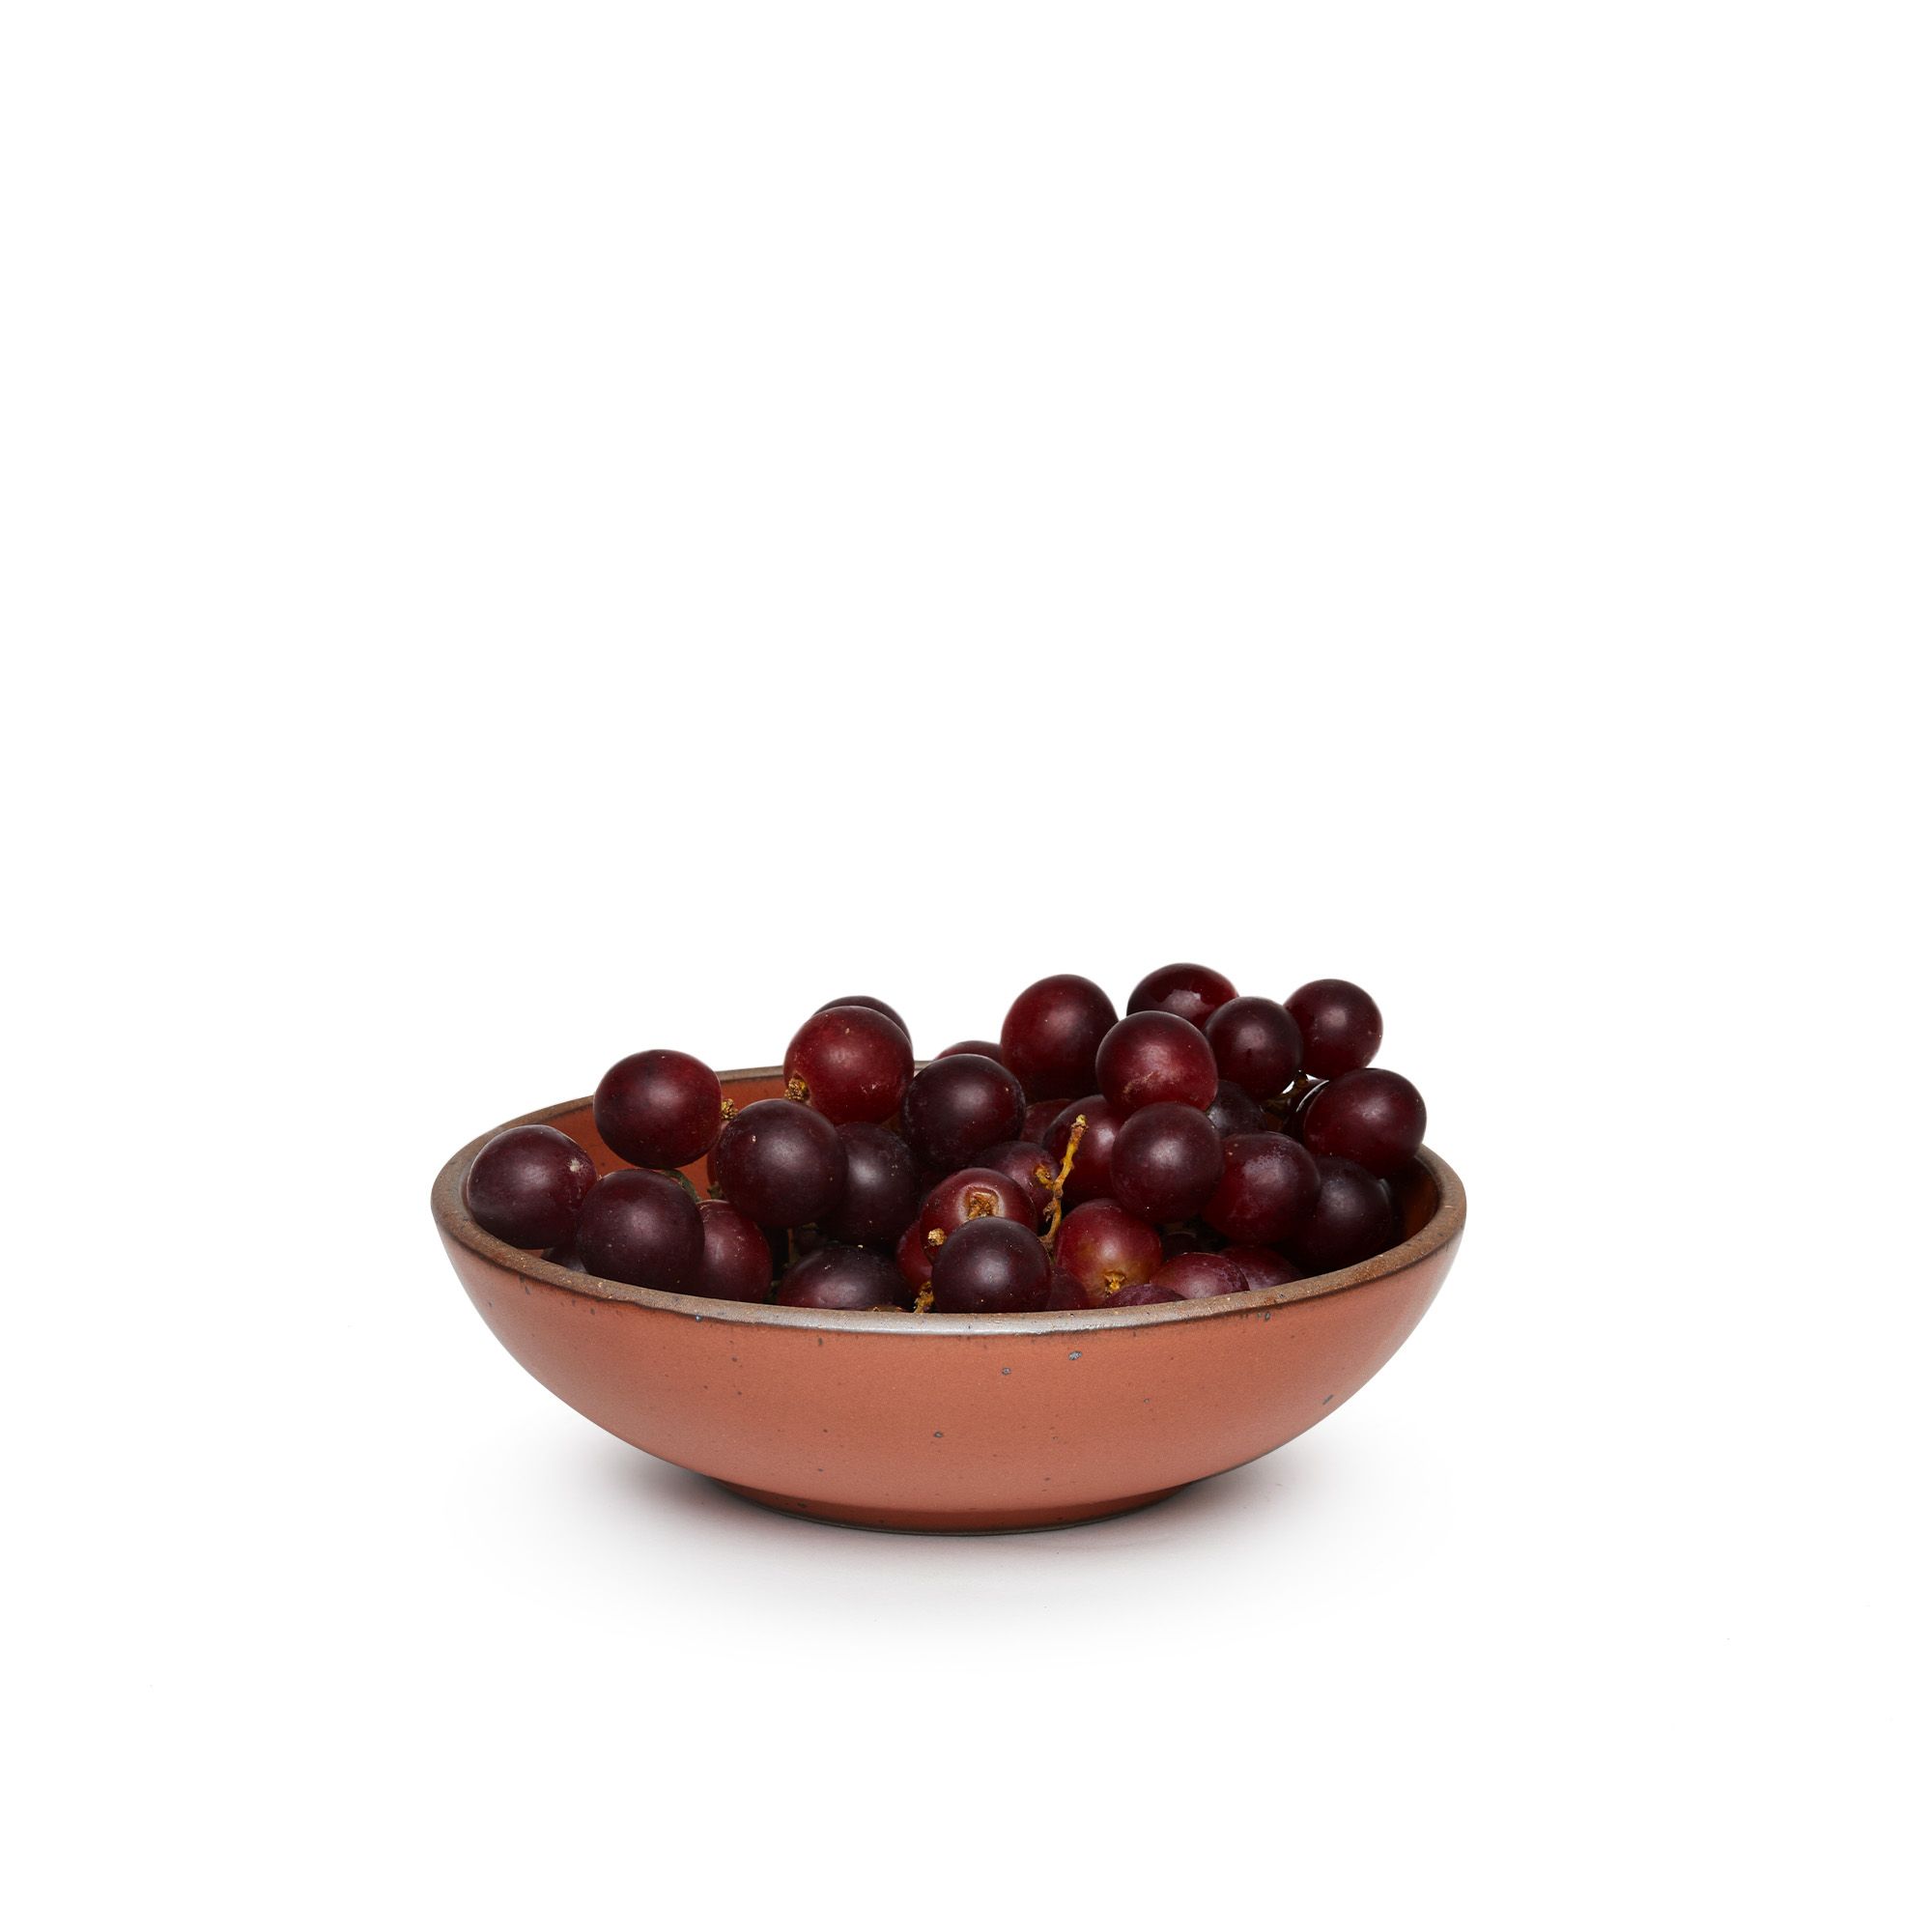 A dinner-sized shallow ceramic bowl in a cool burnt terracotta color featuring iron speckles and an unglazed rim, filled with grapes